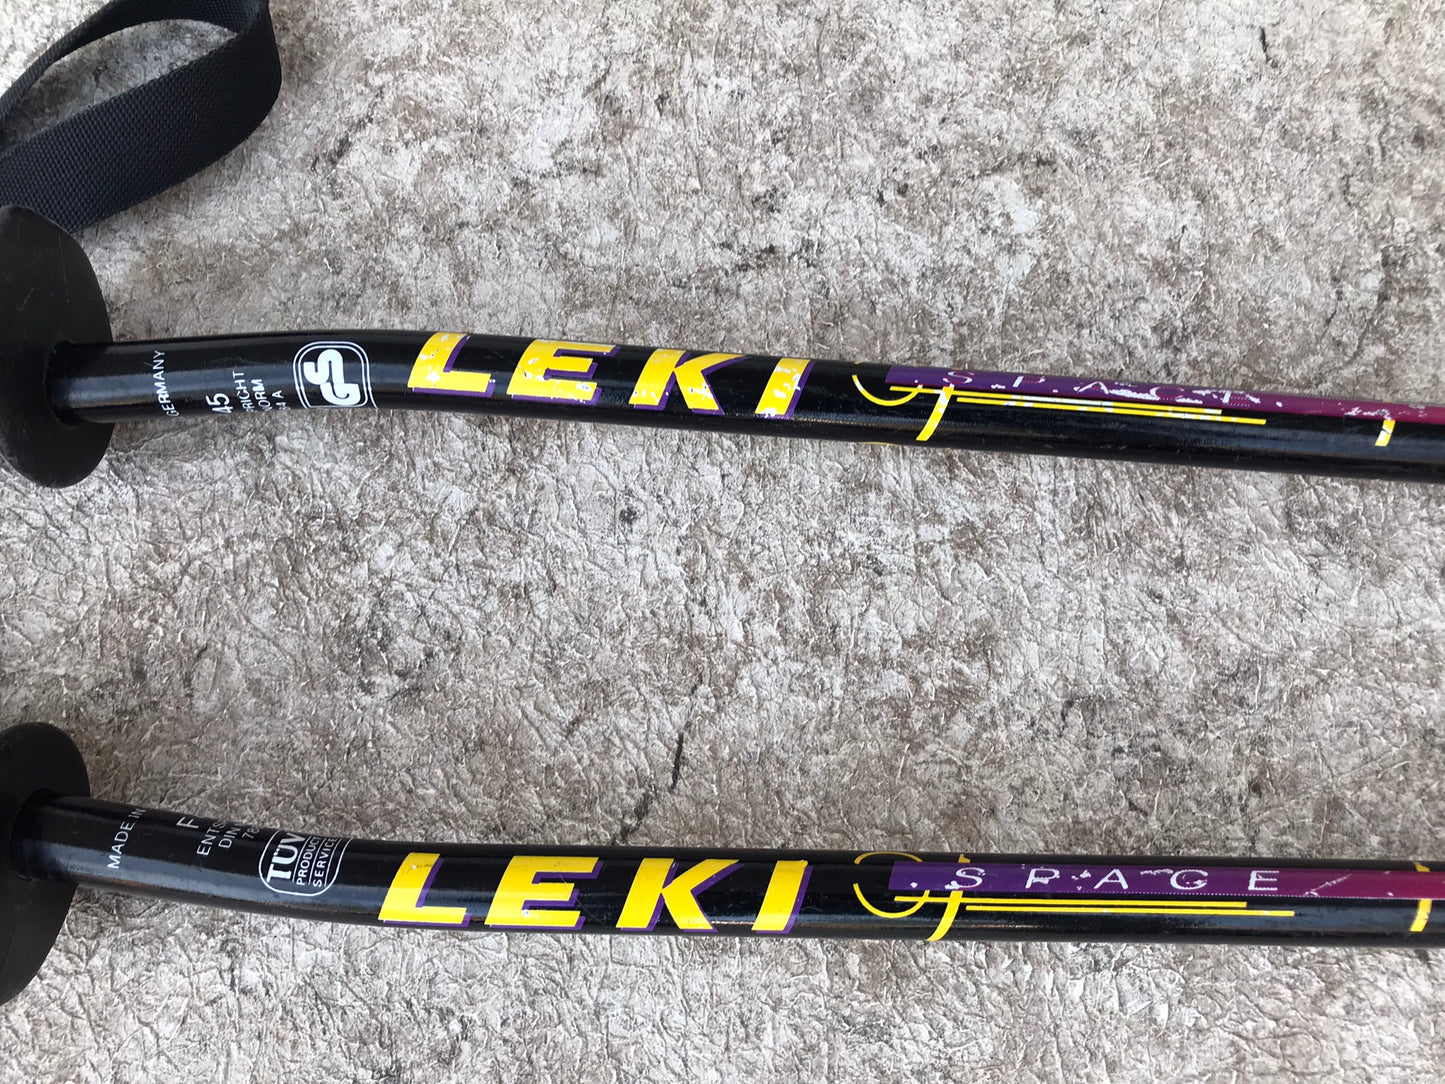 Ski Poles Adult Size 48 inch 120 cm Leki With Angle Poles Black Yellow Pink Made In Germany